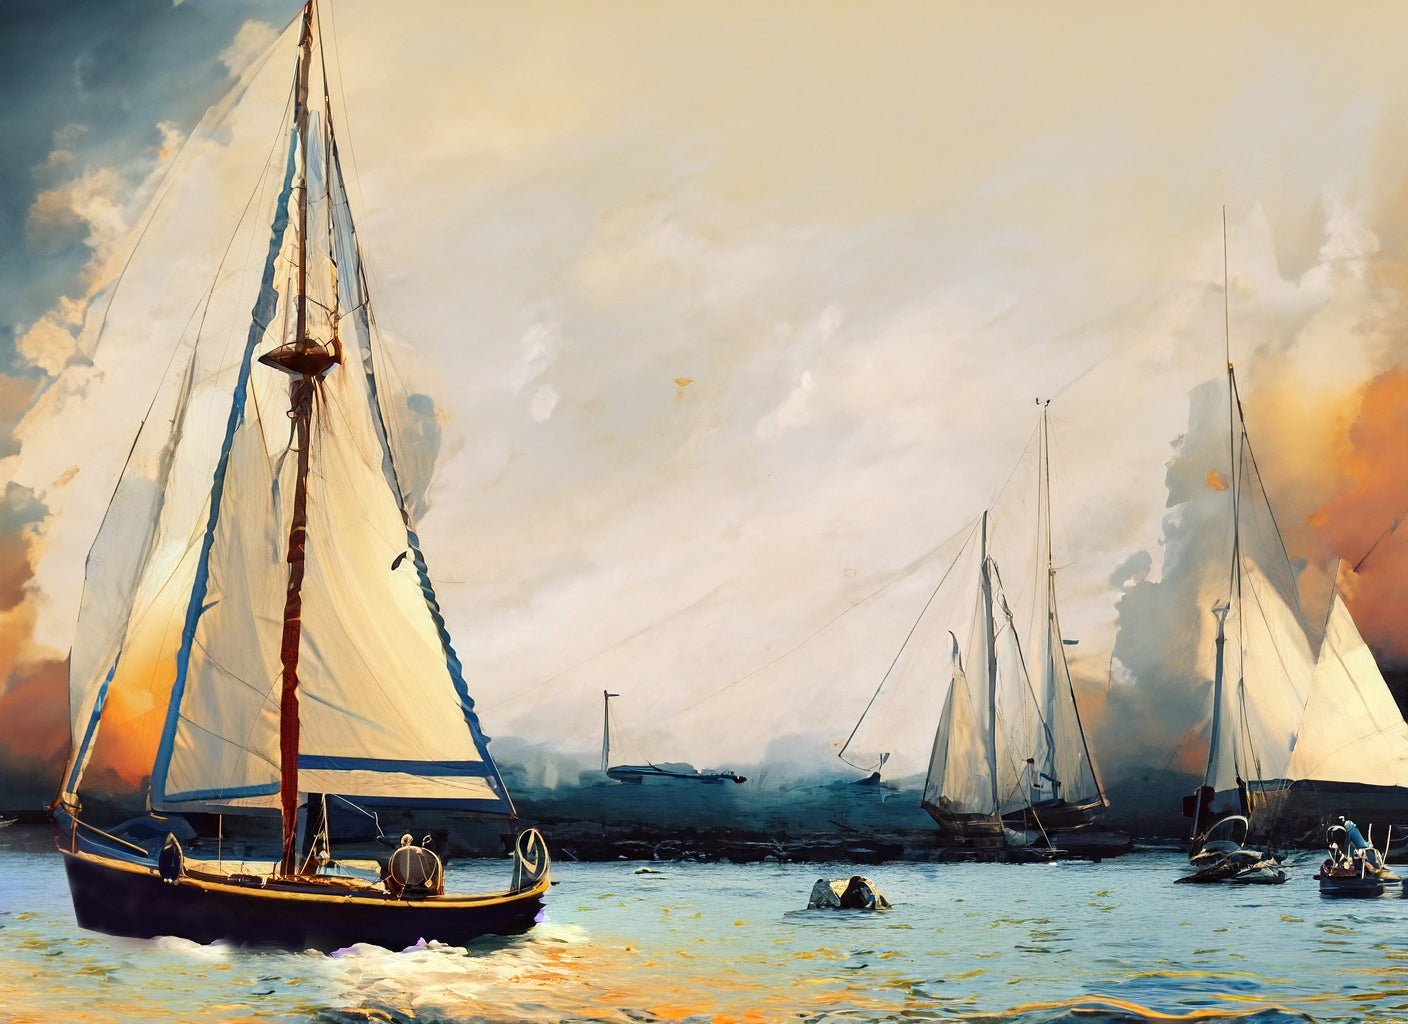 Saillboats in A Stormy Harbor Painting I Art Print